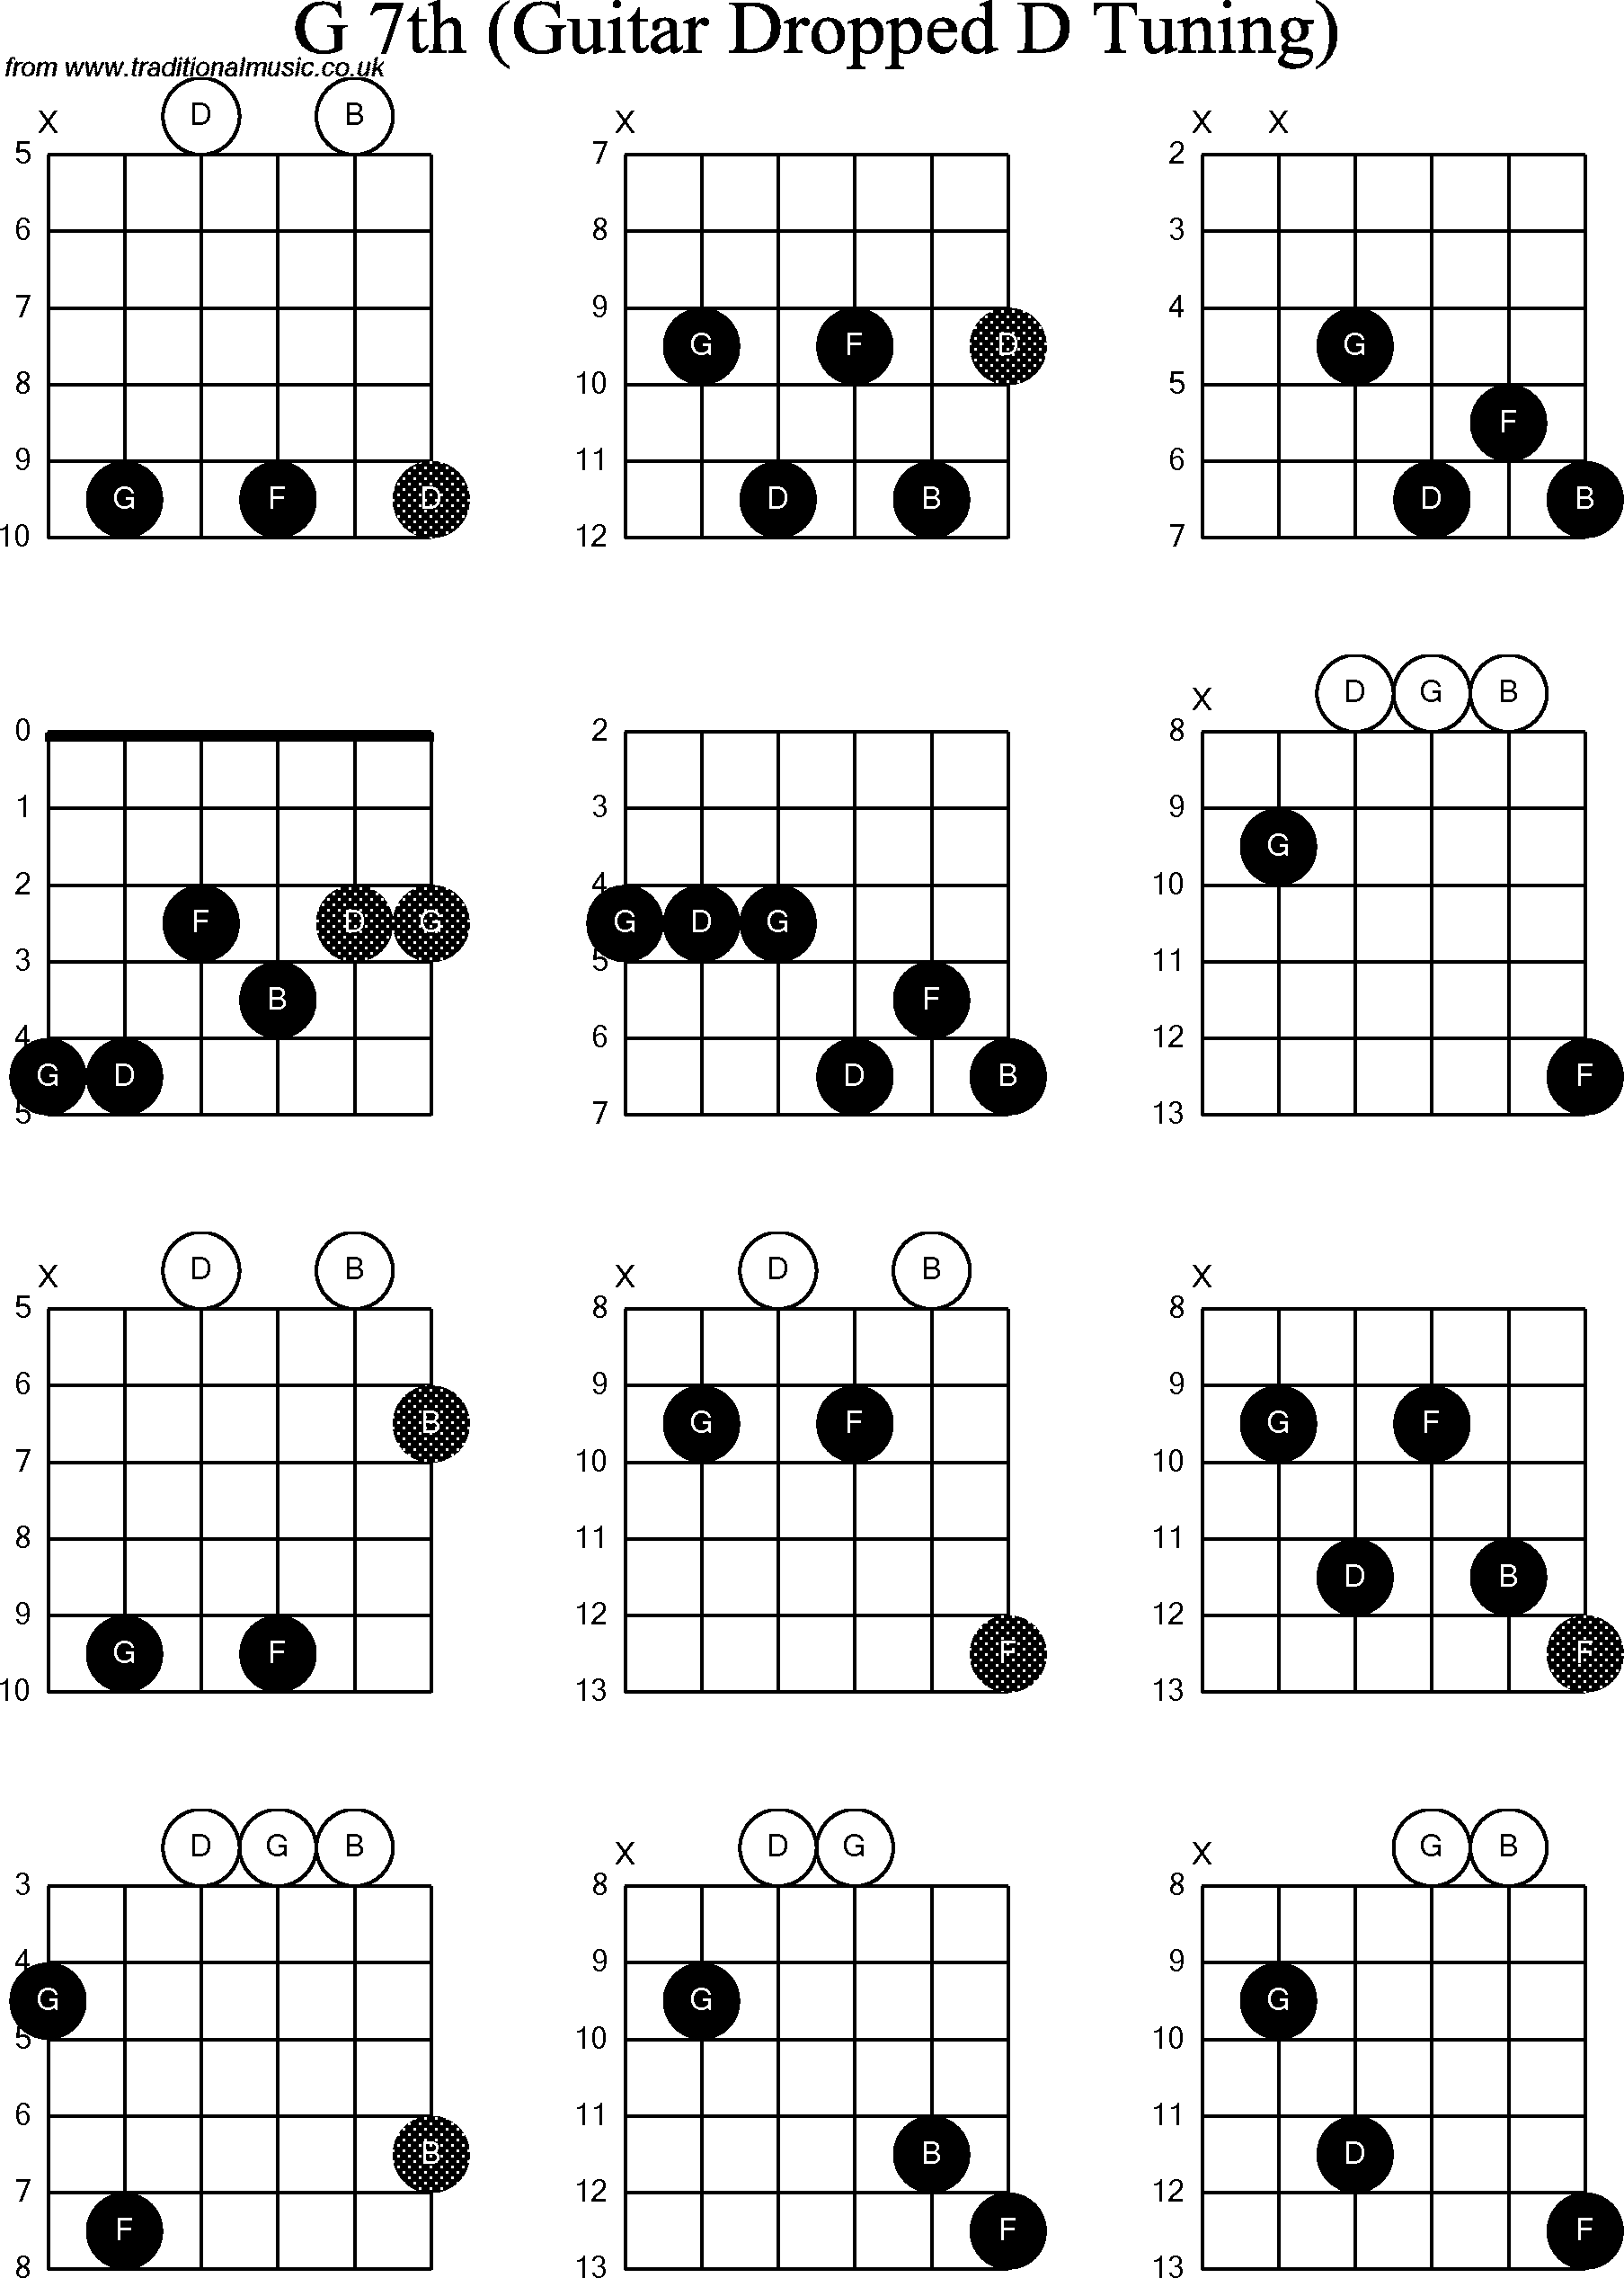 Chord diagrams for dropped D Guitar(DADGBE), G7th